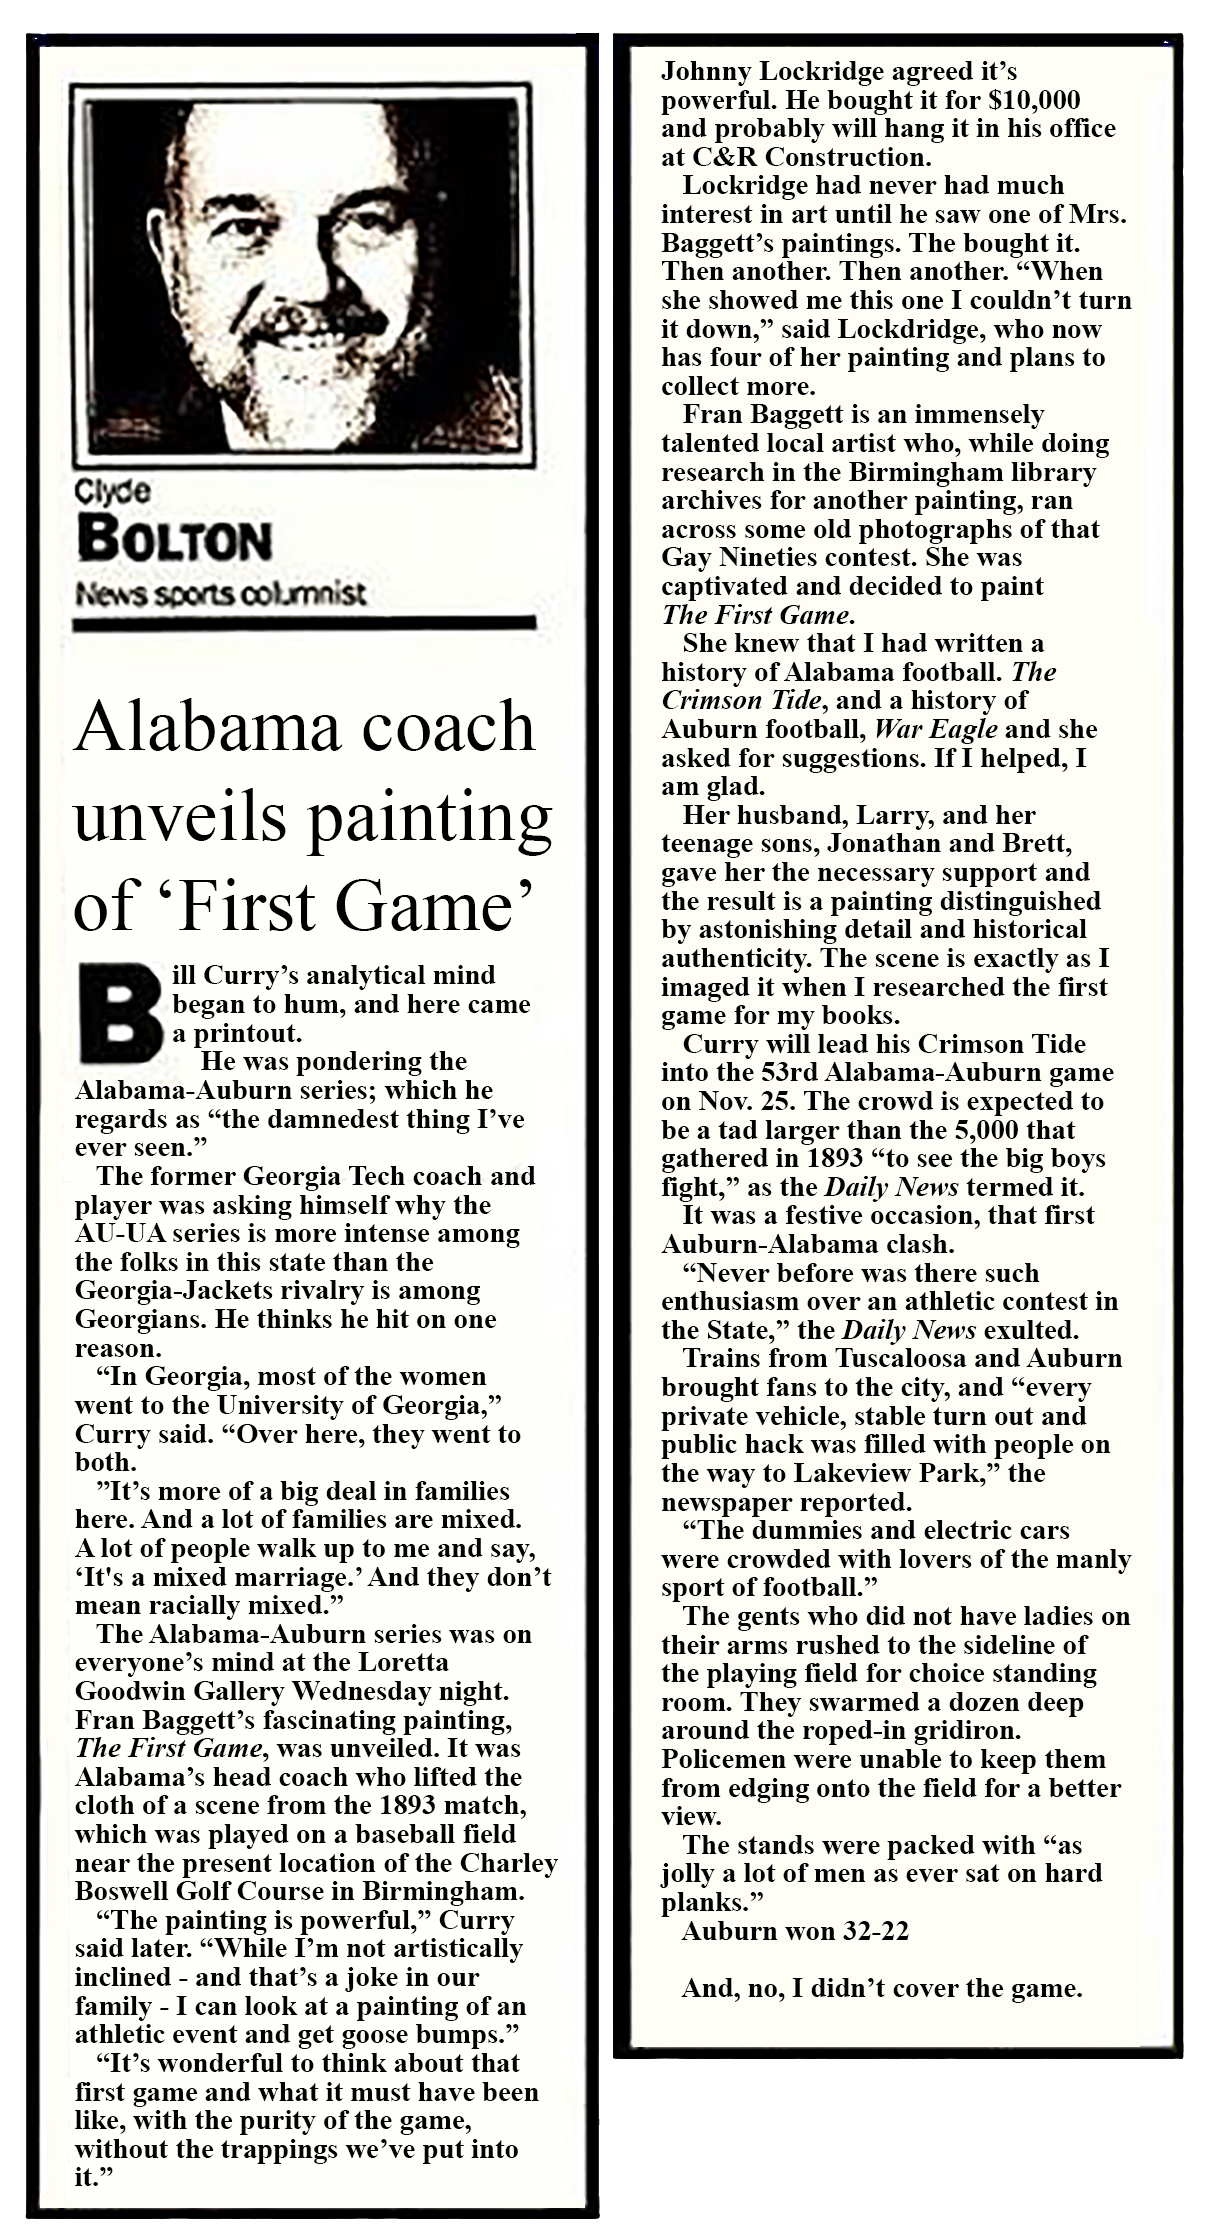 News article about First Game print by Clyde Bolton, sports editor for The Birmingham News